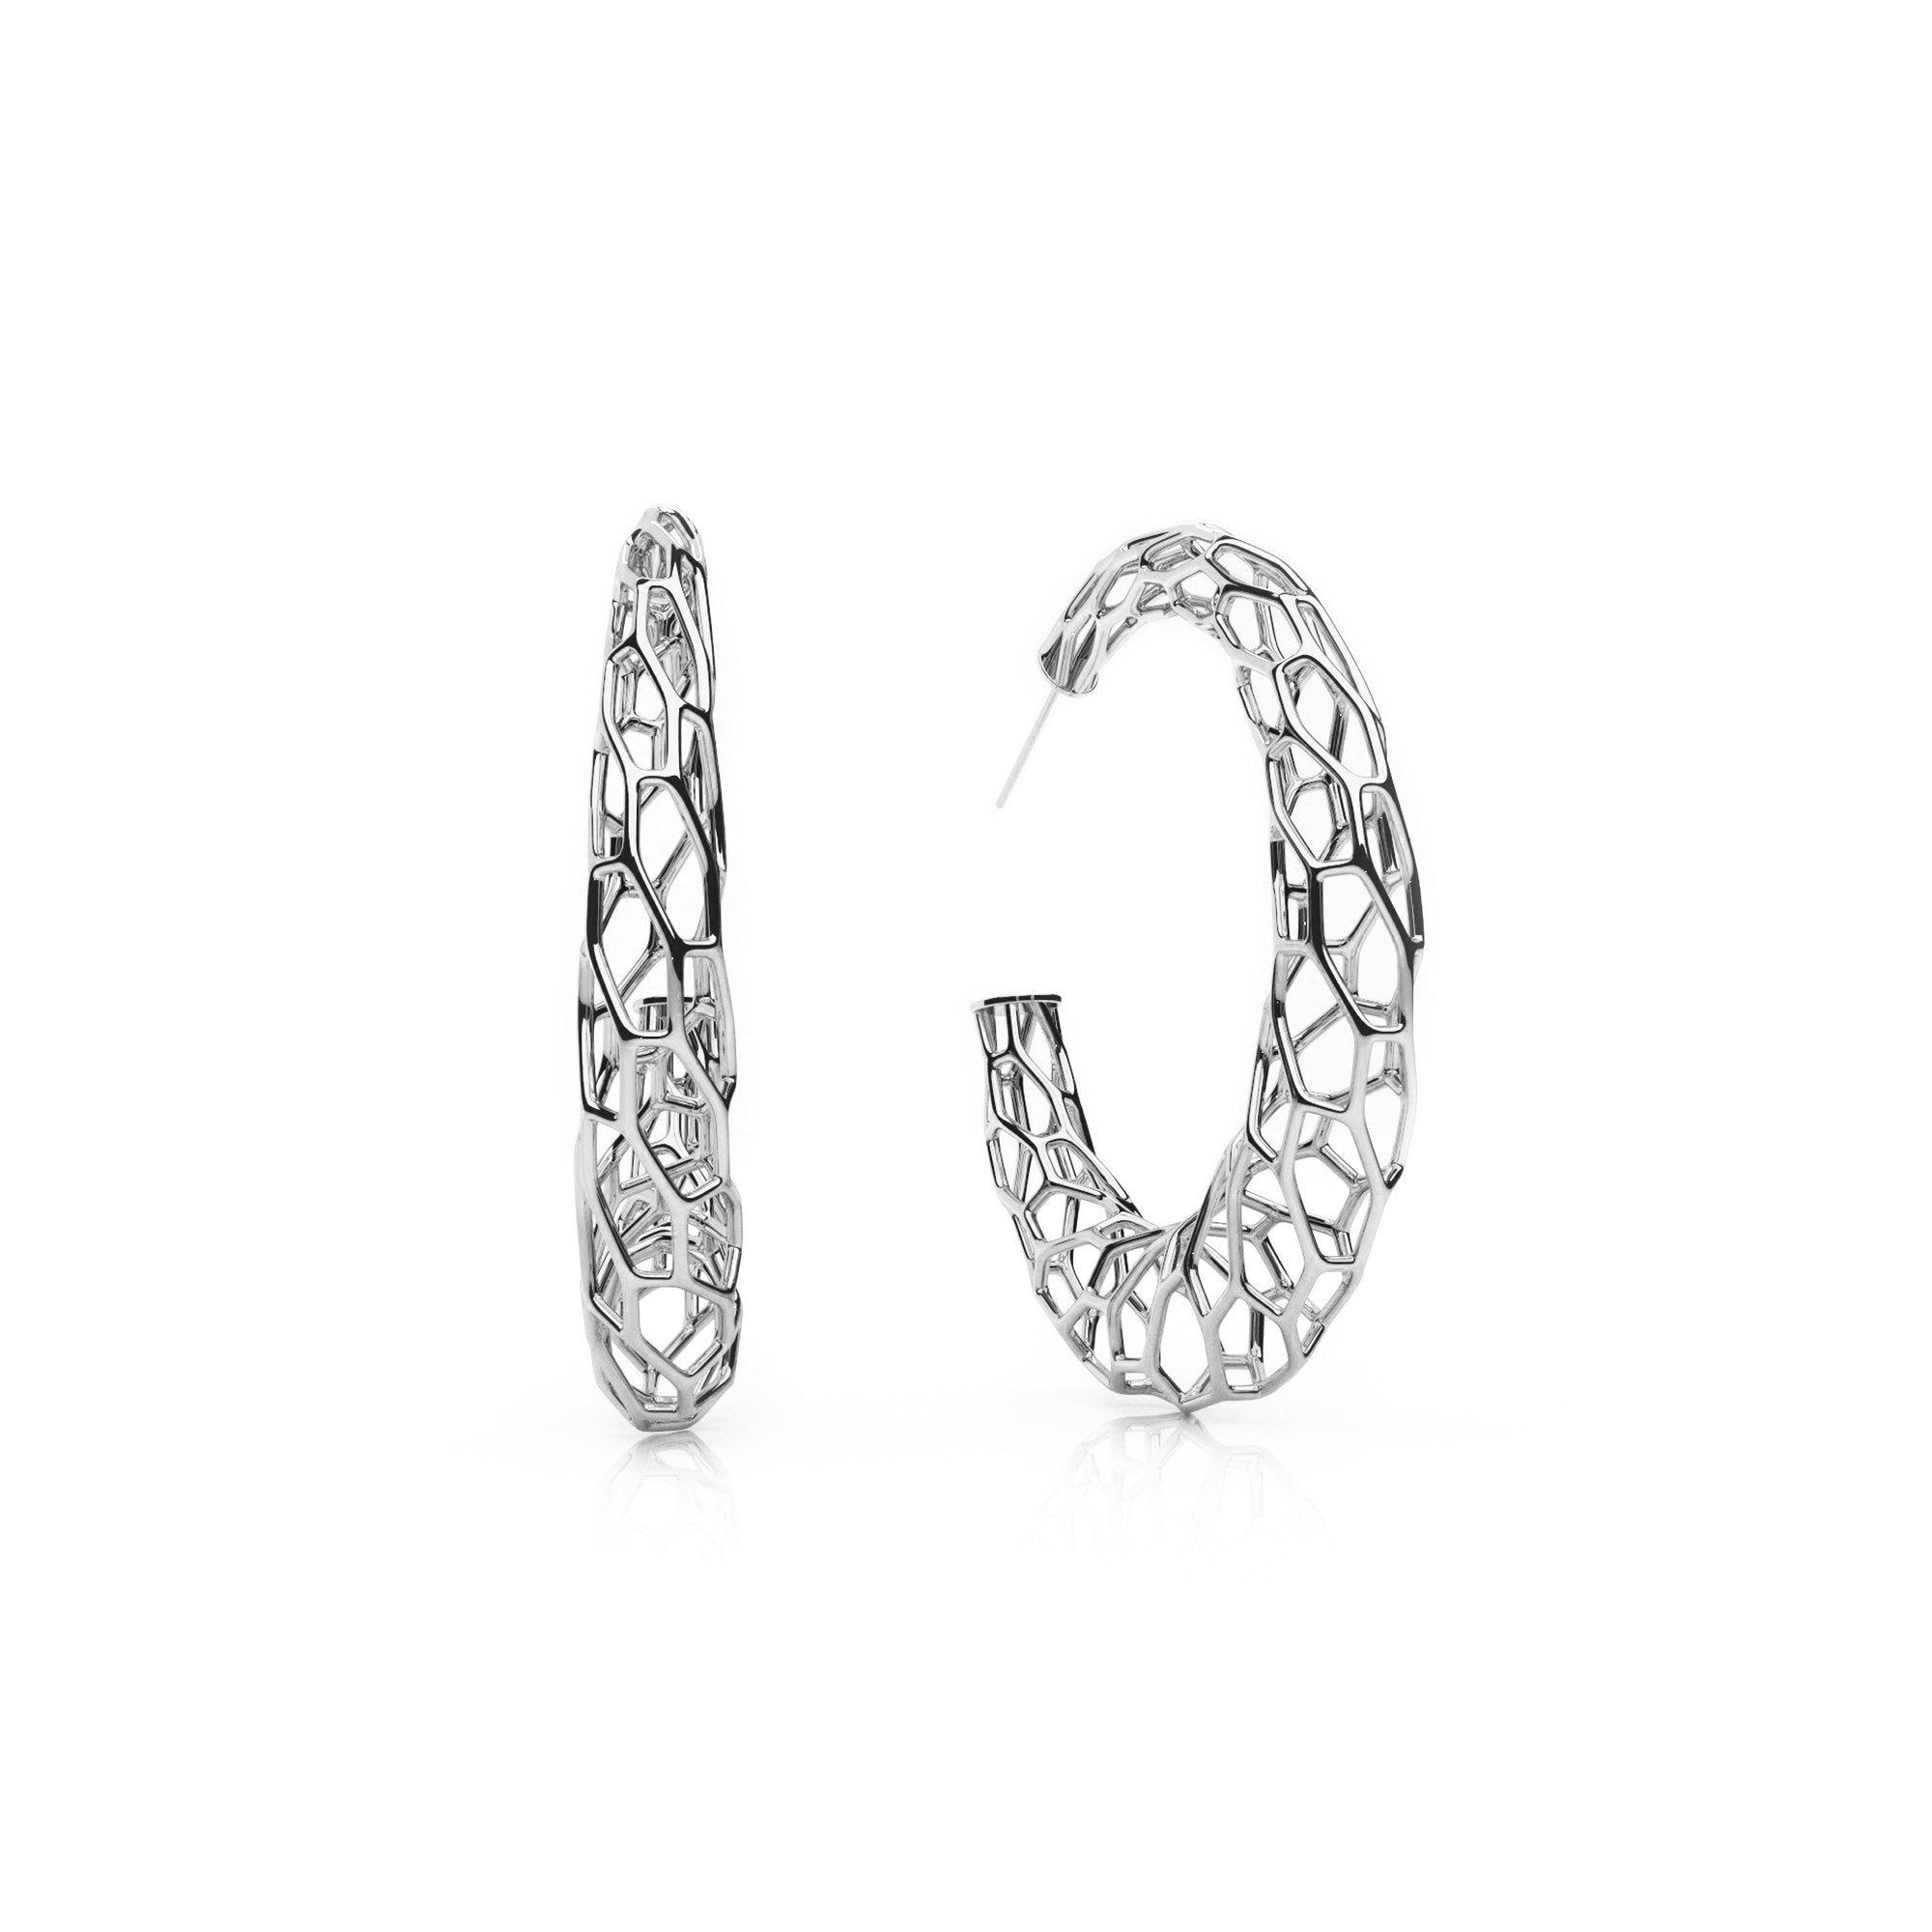 Image of The HIVE Earrings | Halo | Platinum Sterling